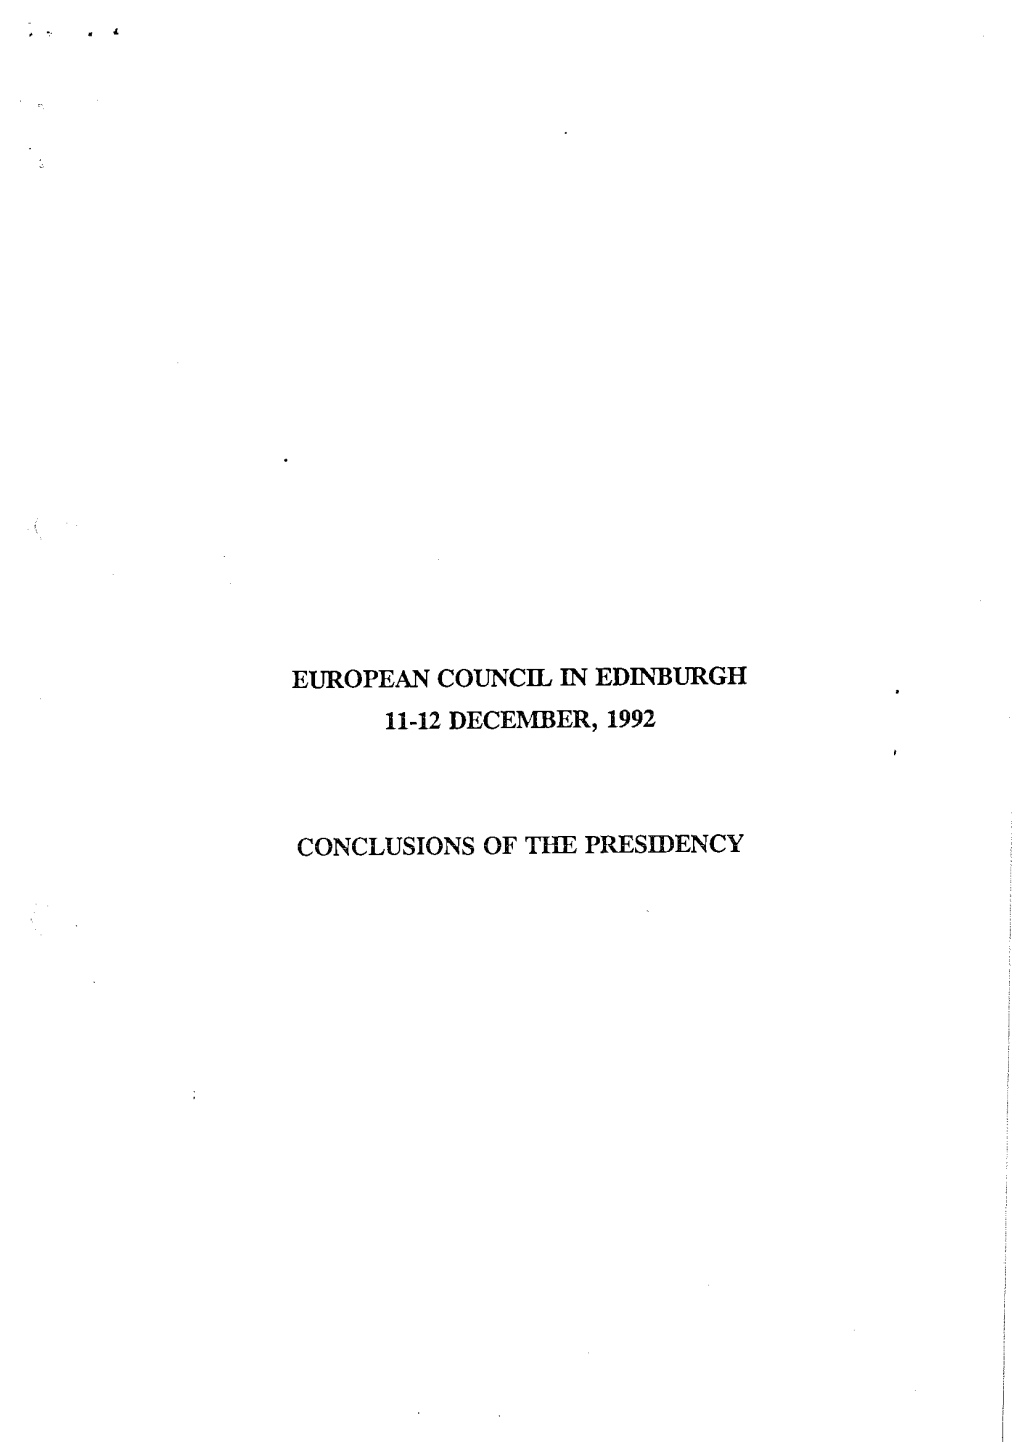 European Council in Edinburgh 11-12 December, 1992 Conclusions of The